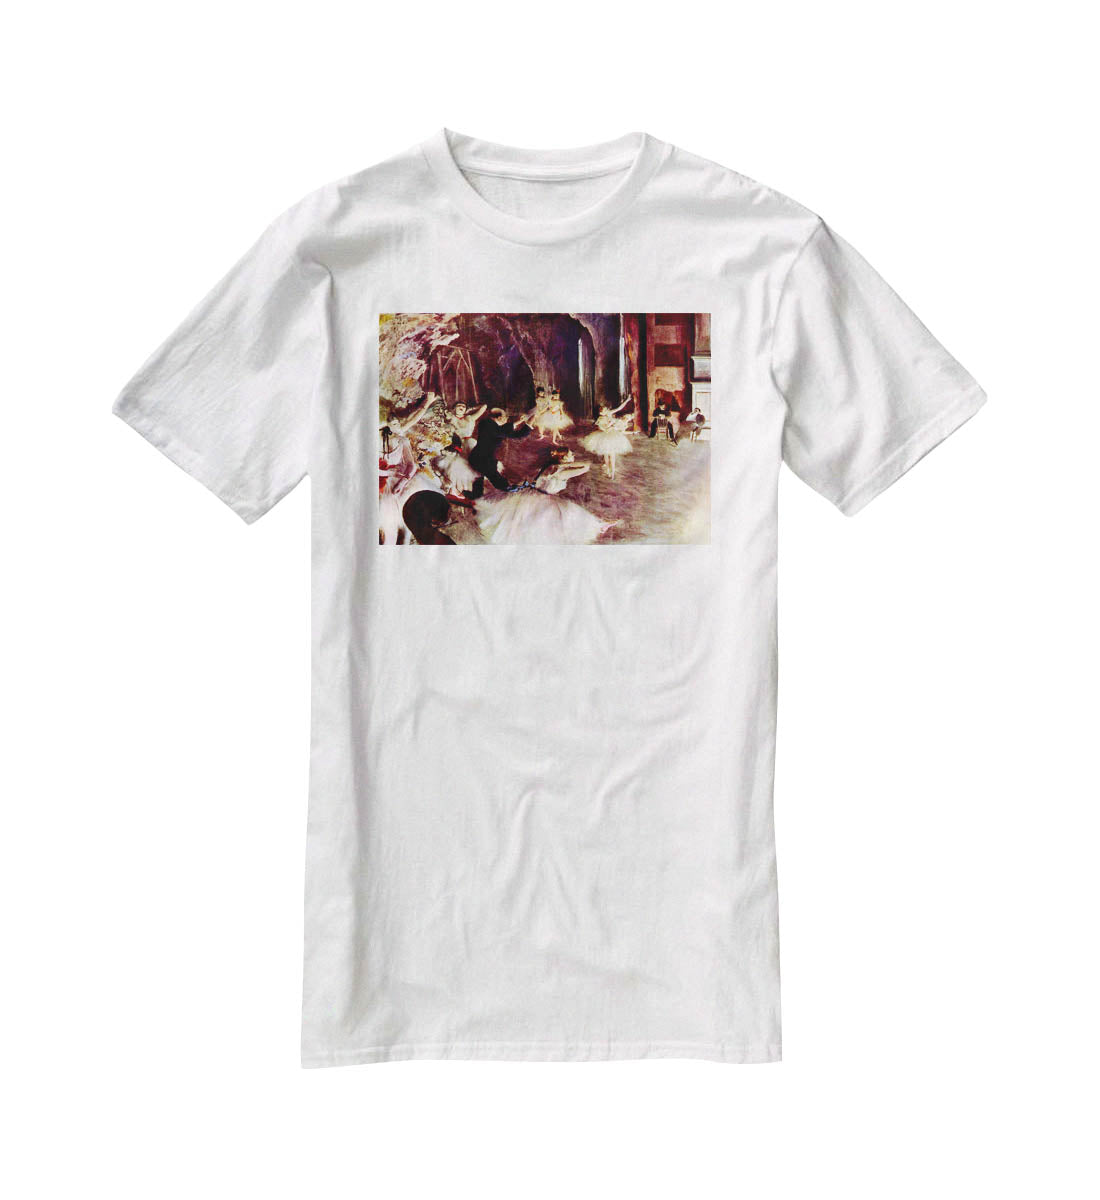 Stage trial by Degas T-Shirt - Canvas Art Rocks - 5